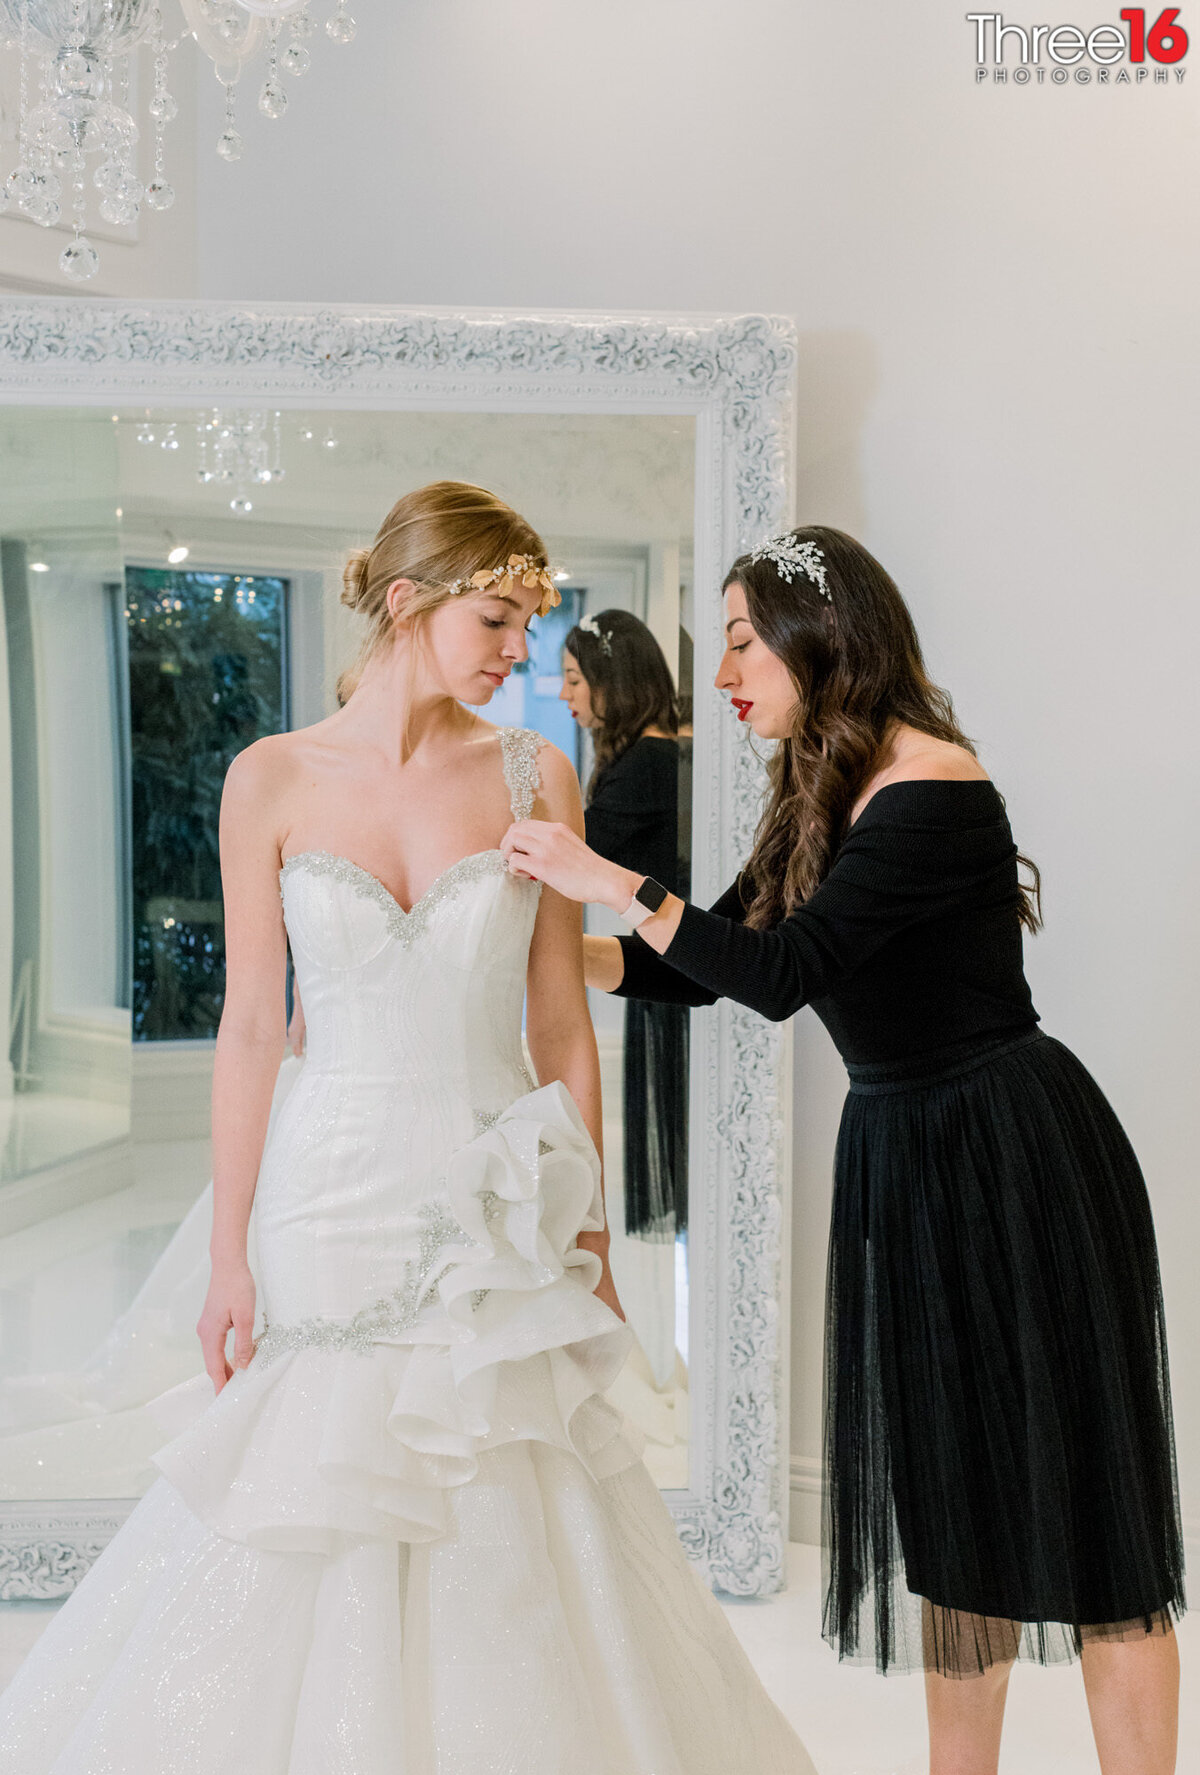 Bride to be gets fitted for her dress by bridal shop employee